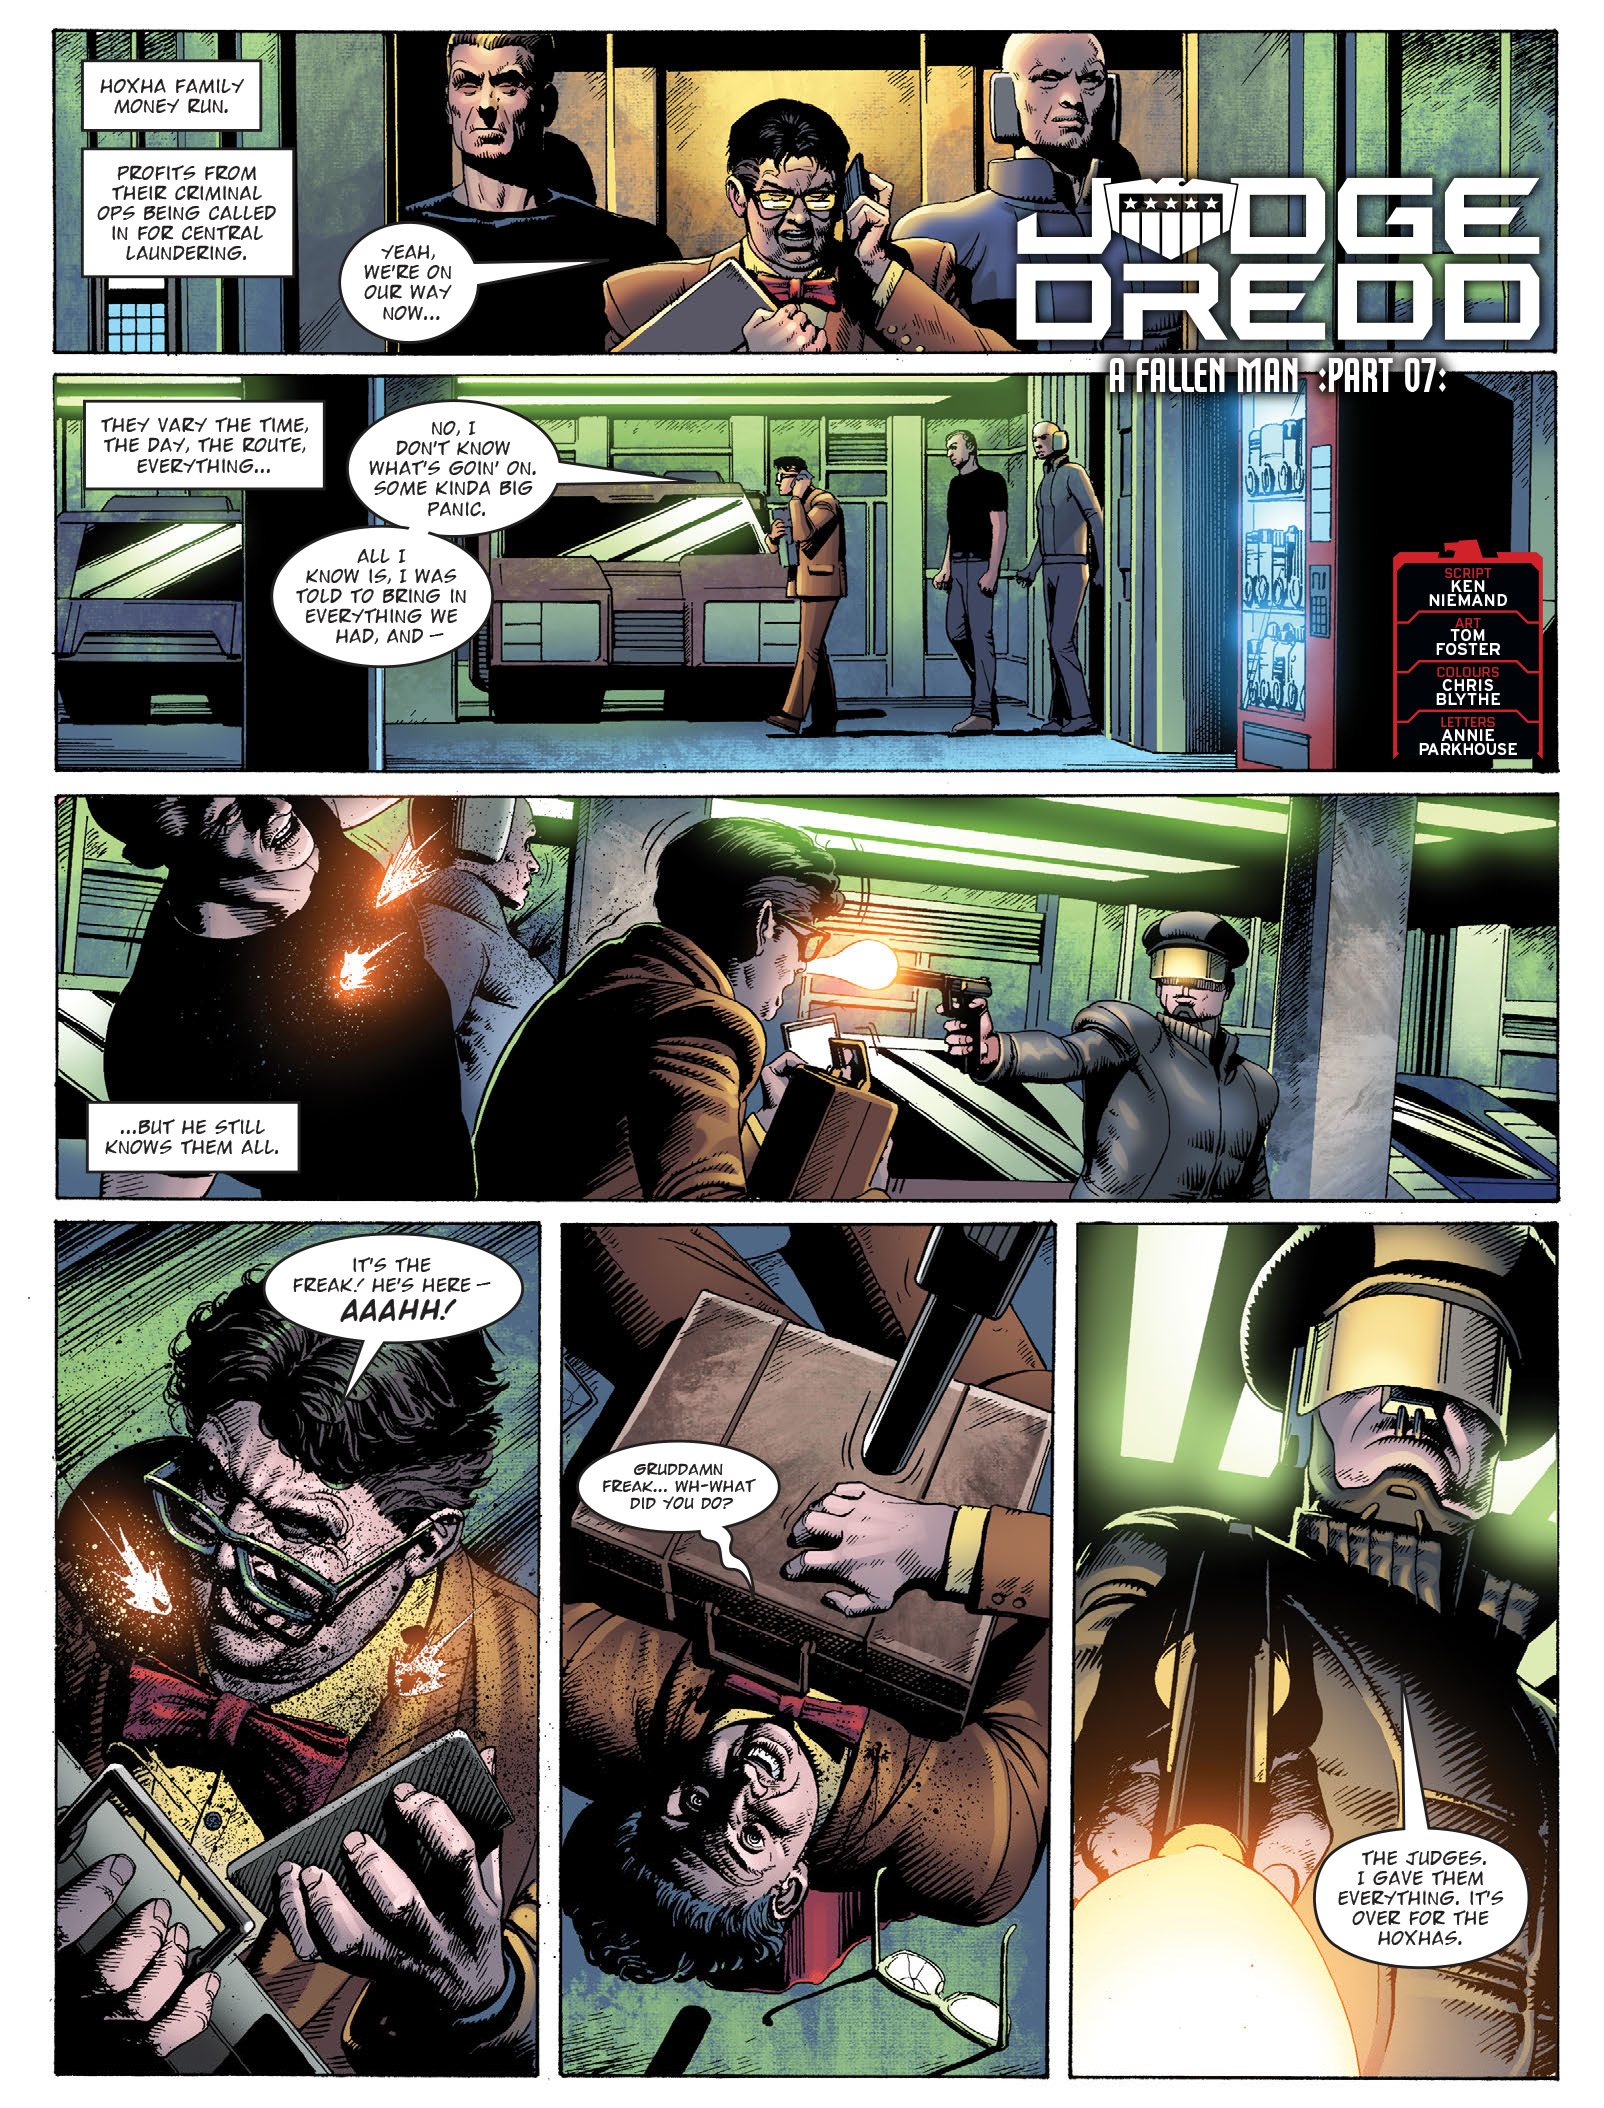 2000 AD: Chapter 2348 - Page 3